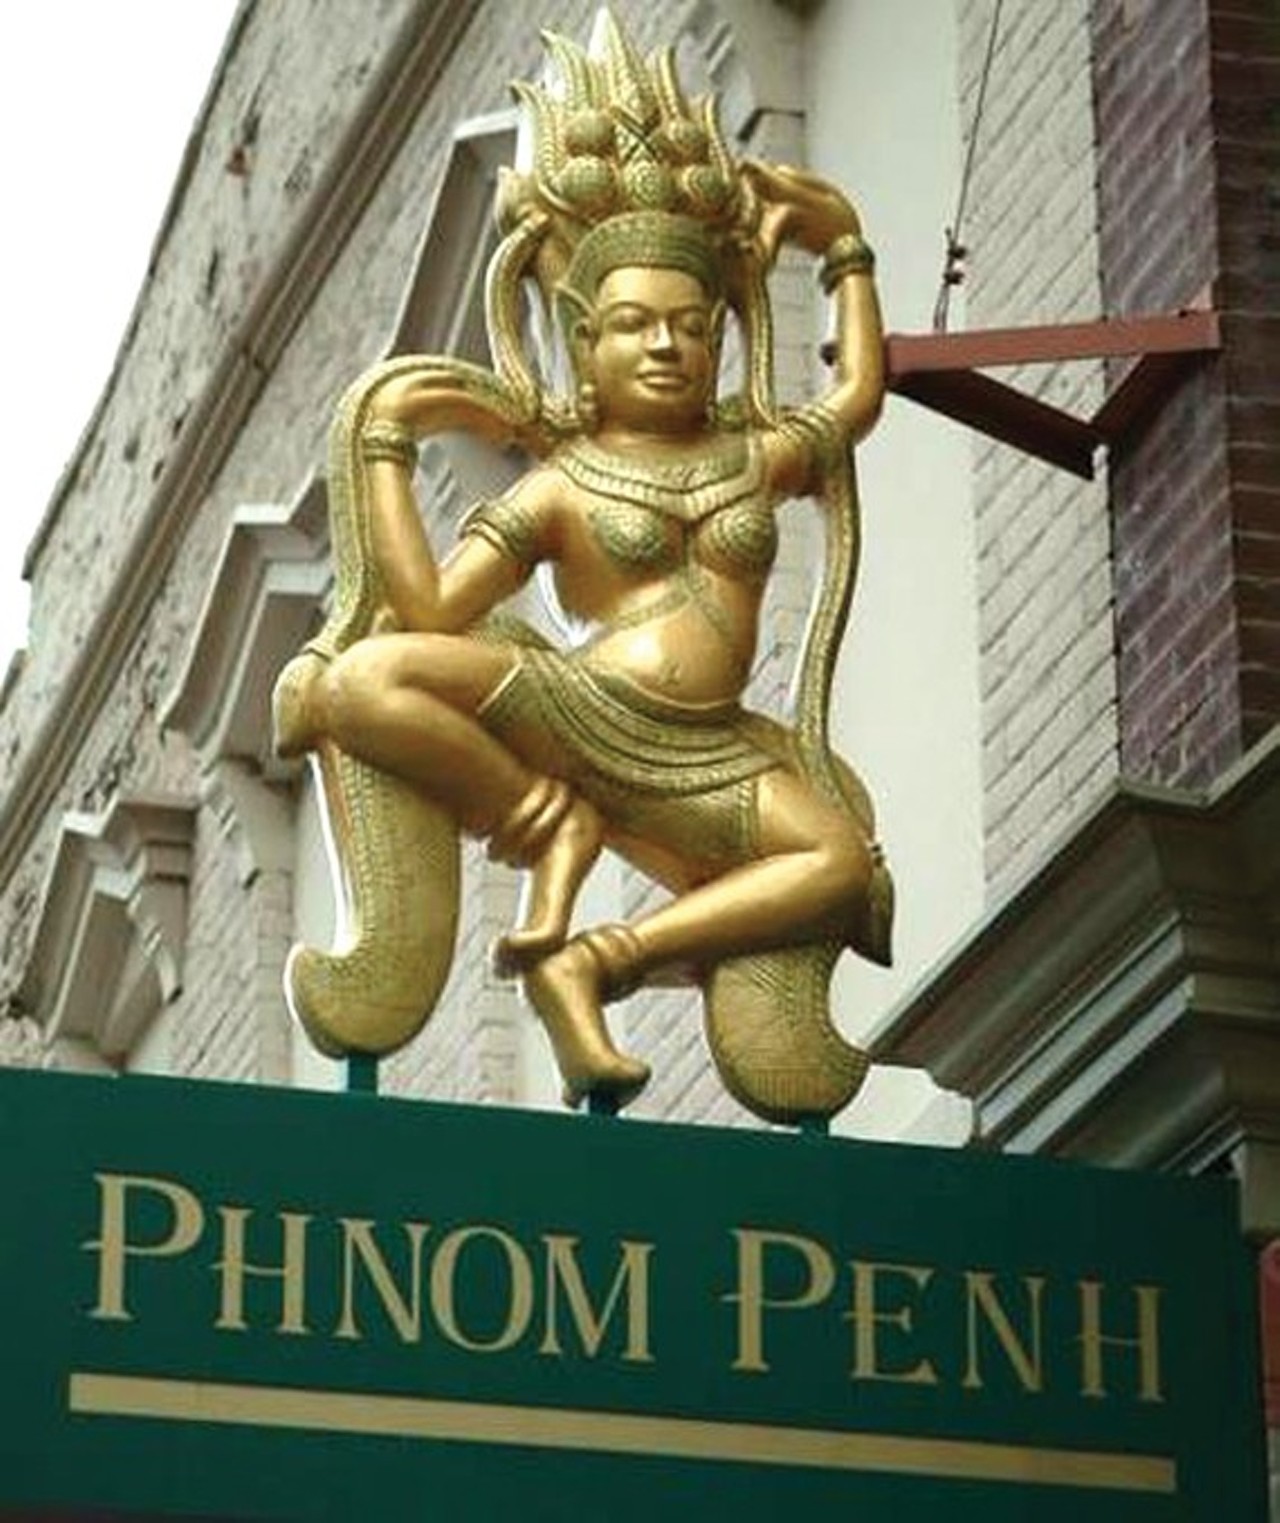  Phnom Penh
1929 W. 25th St., Cleveland
An eye-opening experience for anyone who thinks Asian food is limited to lo mein in paper containers. This cuisine rambles between Cambodian home cooking and Vietnamese classics. The menu &#150; heavy with descriptions and suggestions &#150; reads like a textbook.
Photo via Phnom Penh